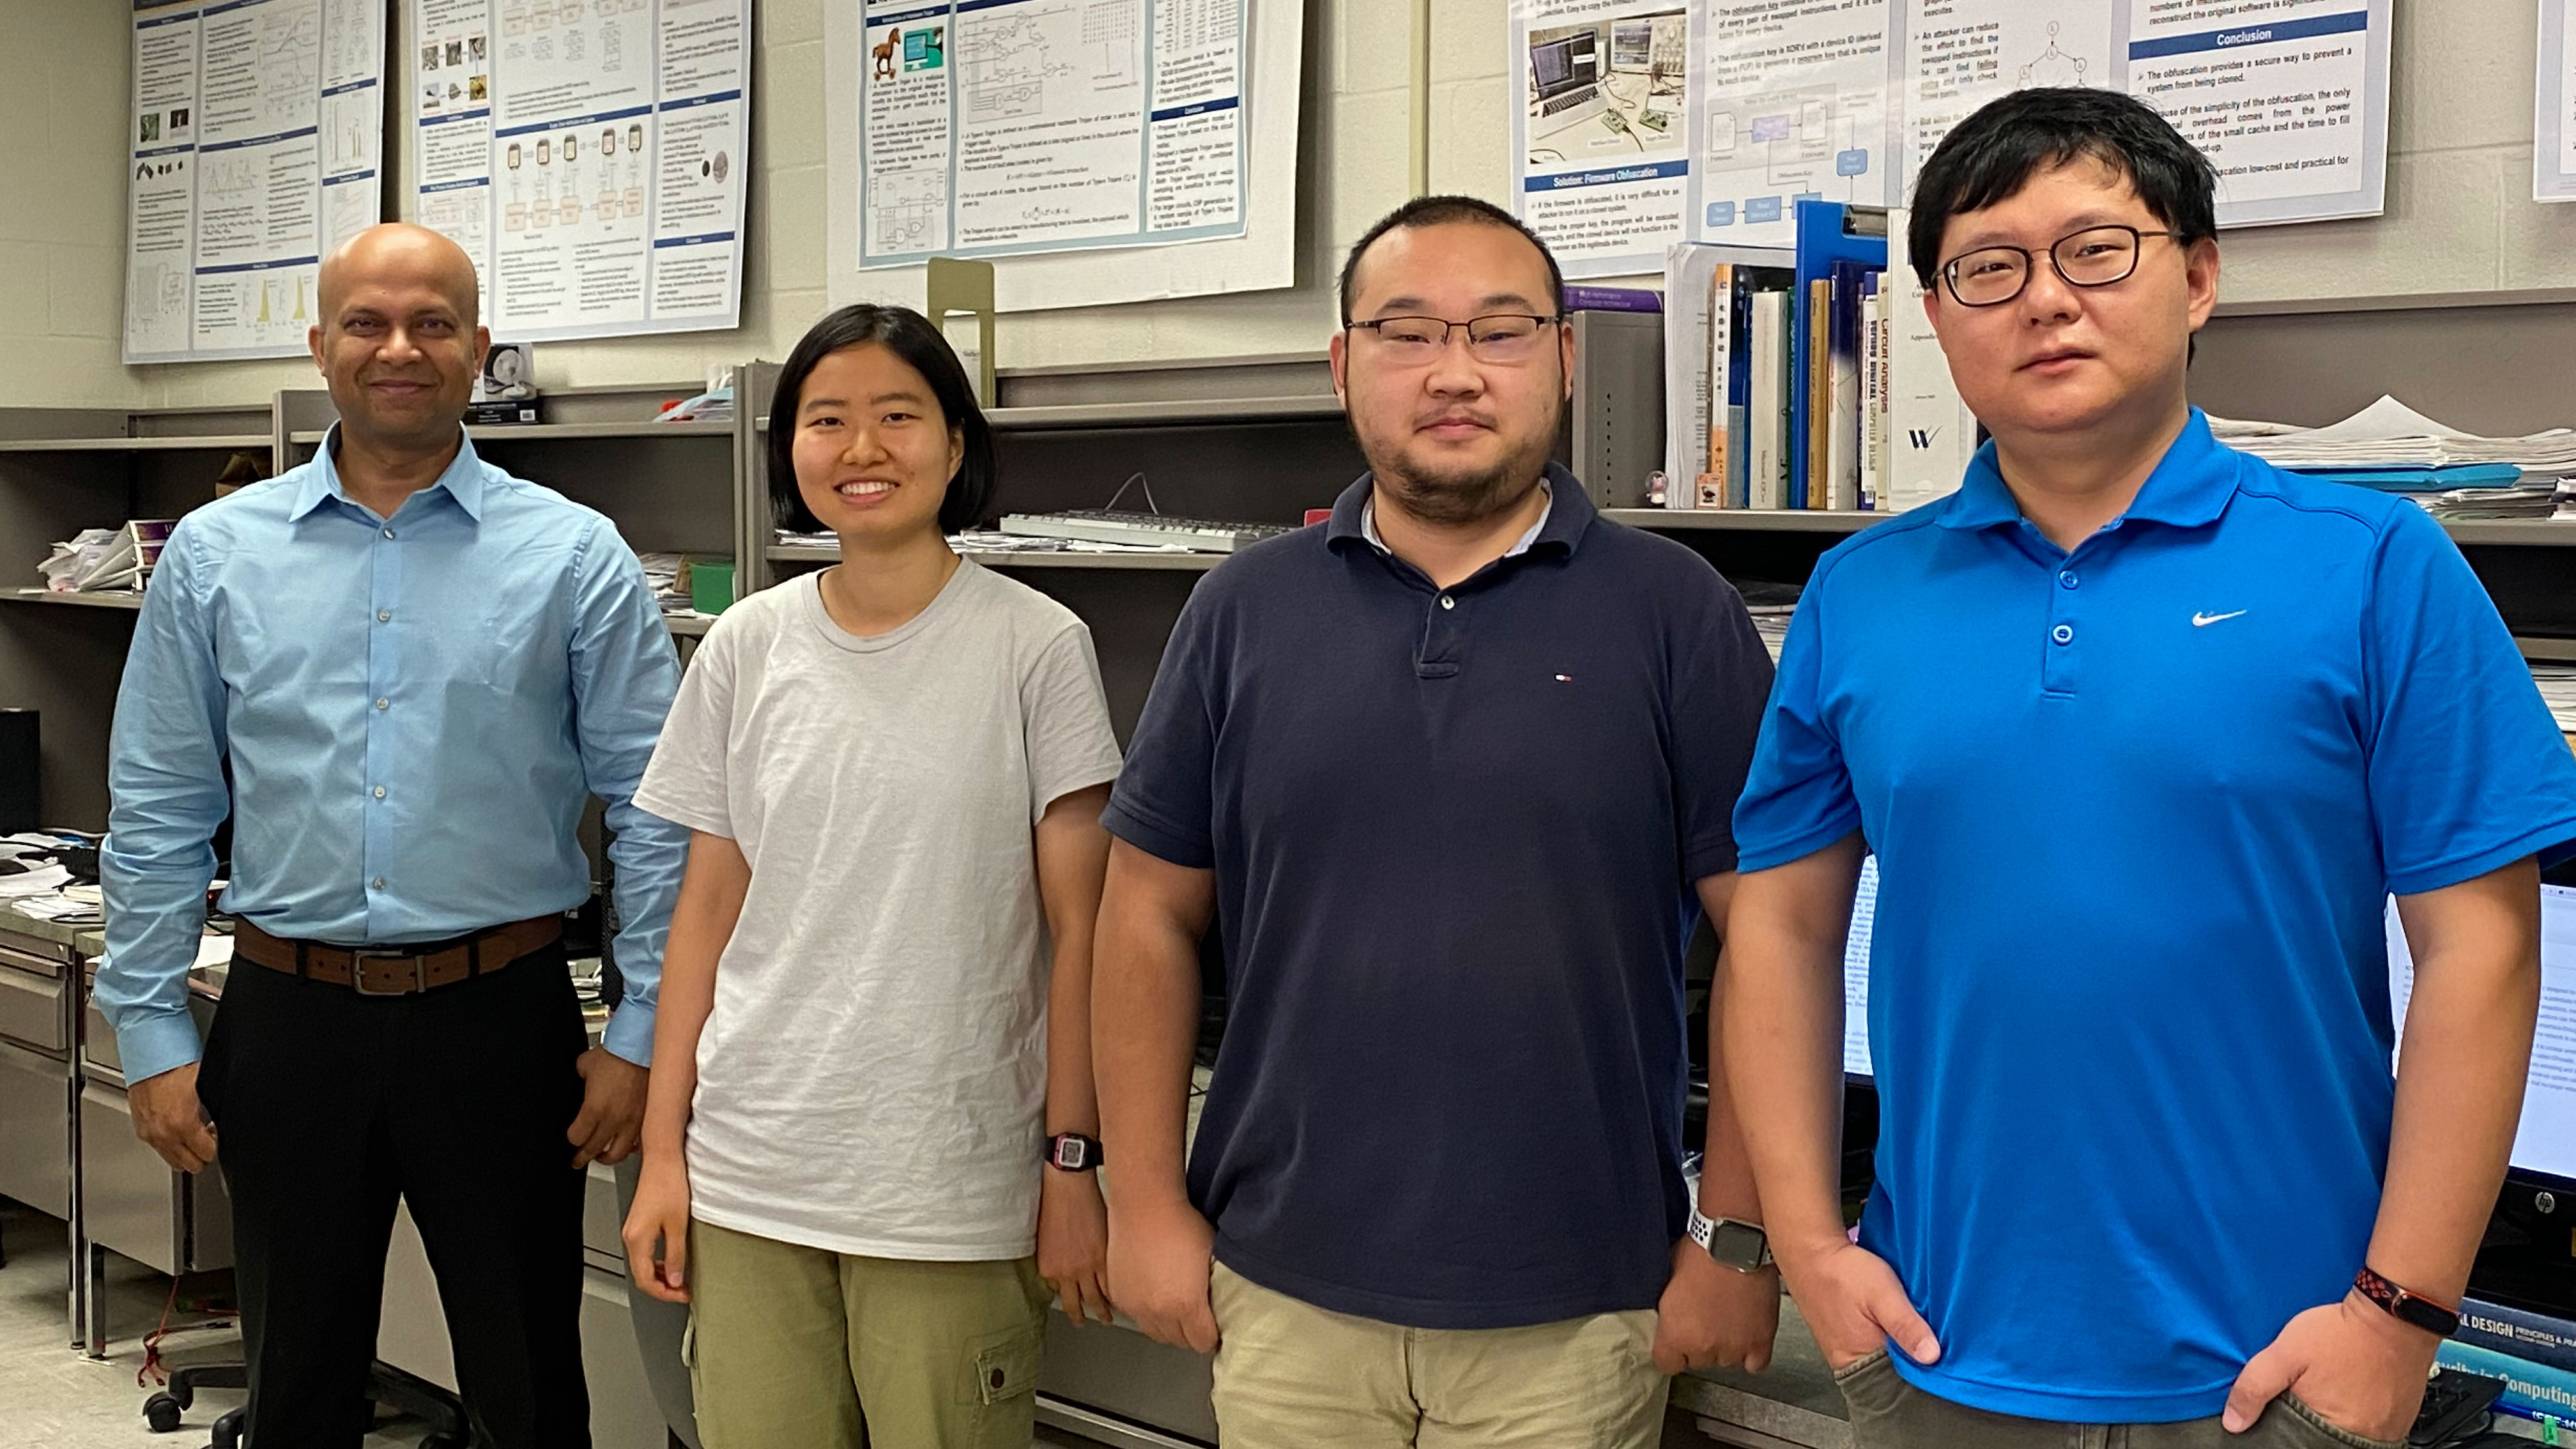 Dr. Ujjwal Guin, assistant professor in electrical and computer engineering, with graduate students Yadi Zhong, Yuqiao Zhang, and Ziqi Zhou.